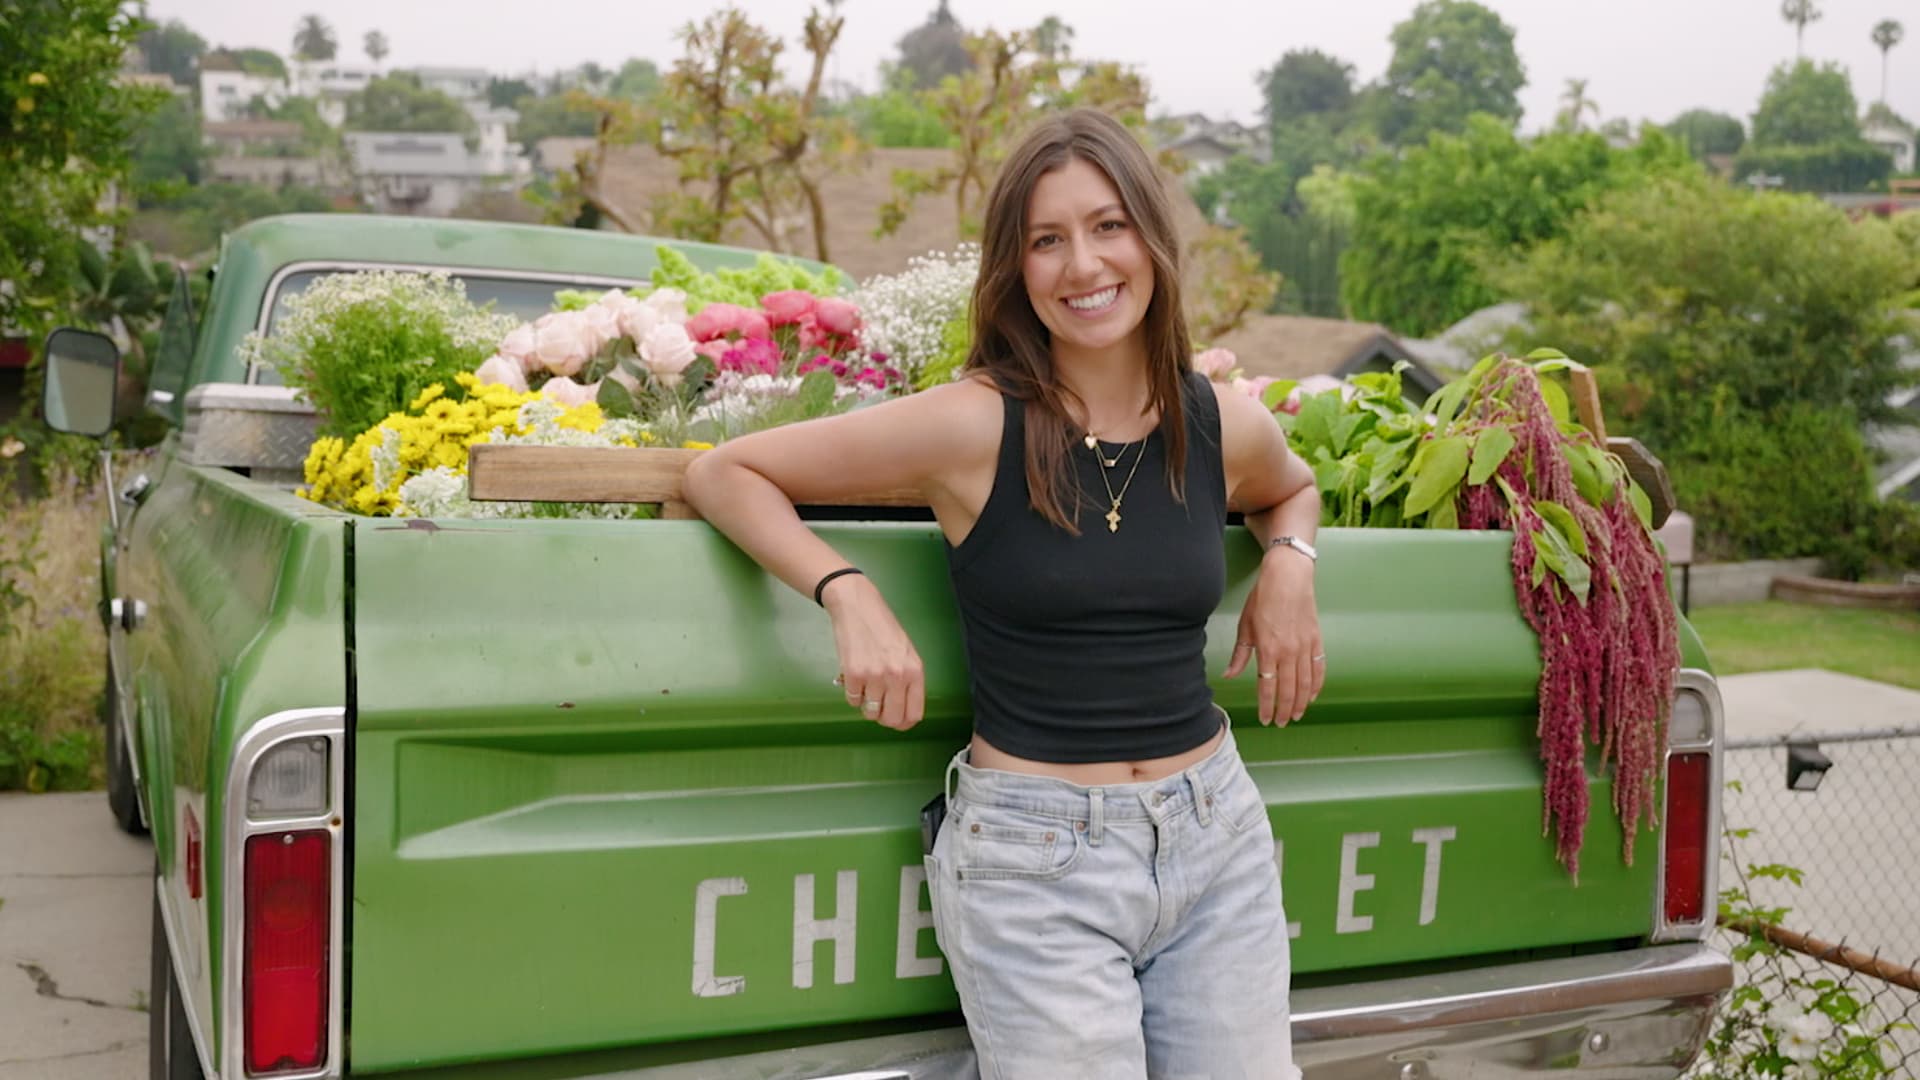 29-year-old quit corporate job to sell flowers — now she brings in up to $16,000 a month